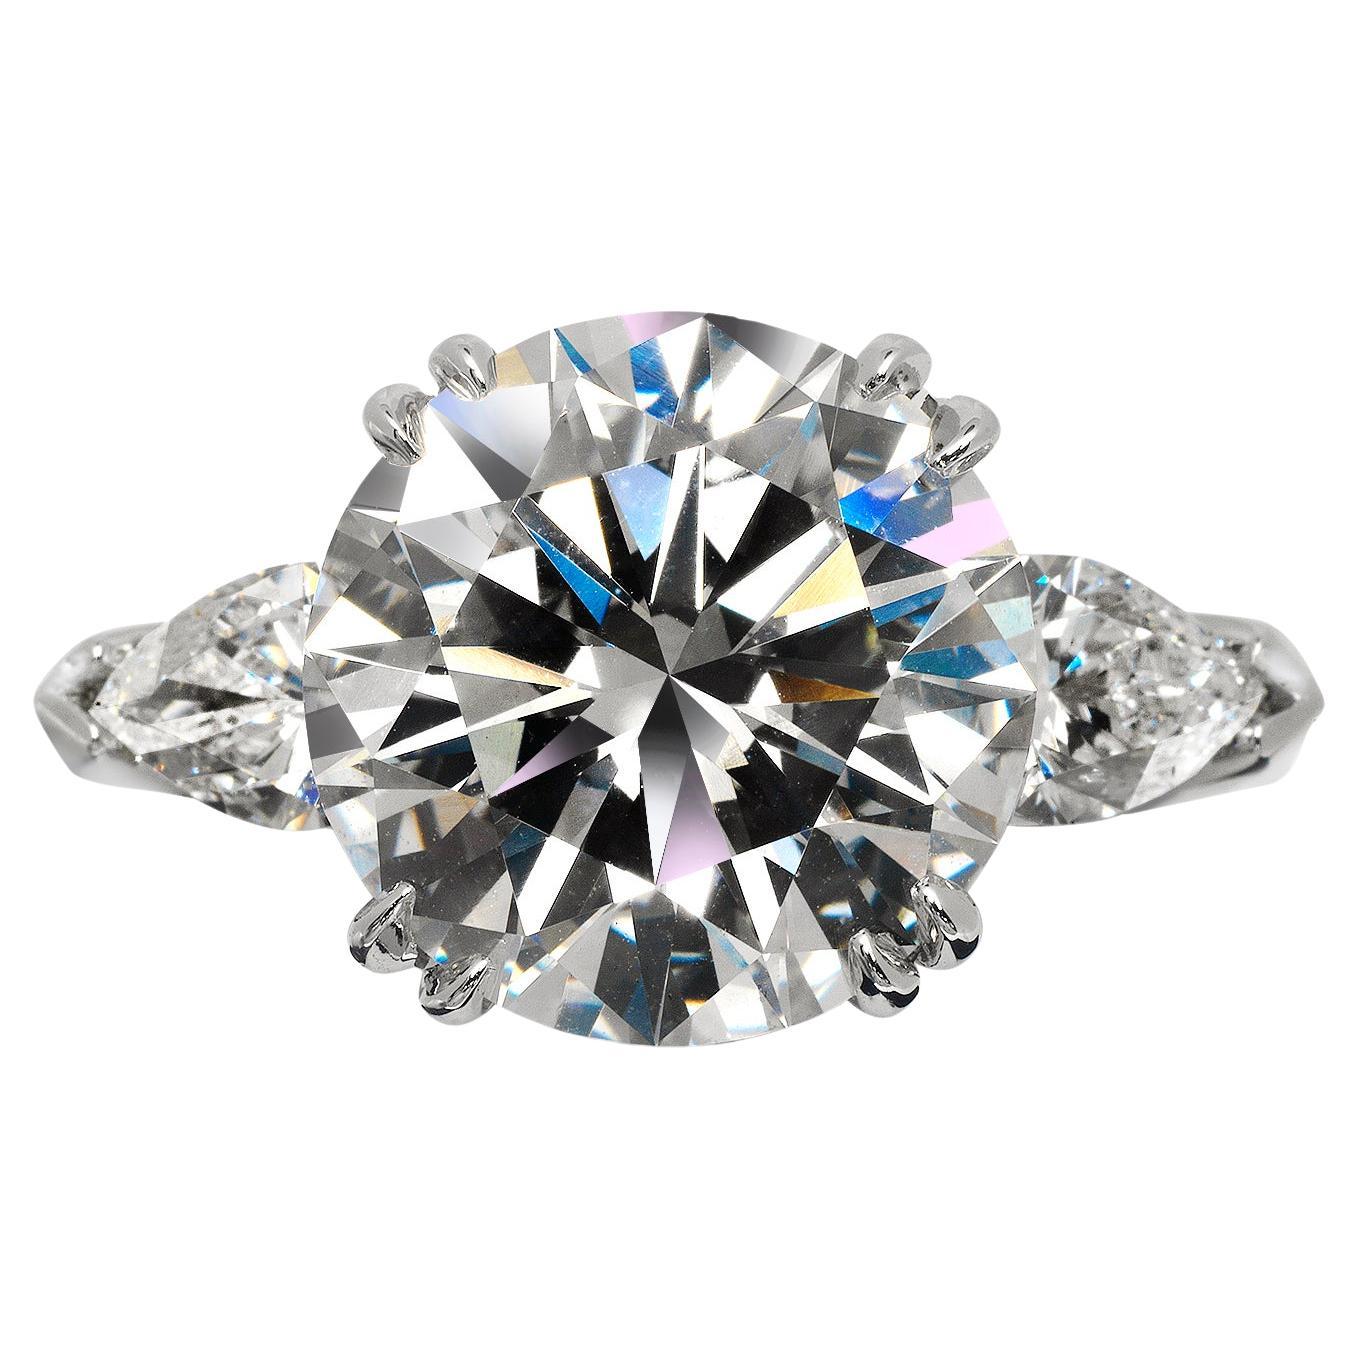 8 Carat Round Diamond Engagement Ring 3 Stones Pear Shaped GIA Certified G VS2